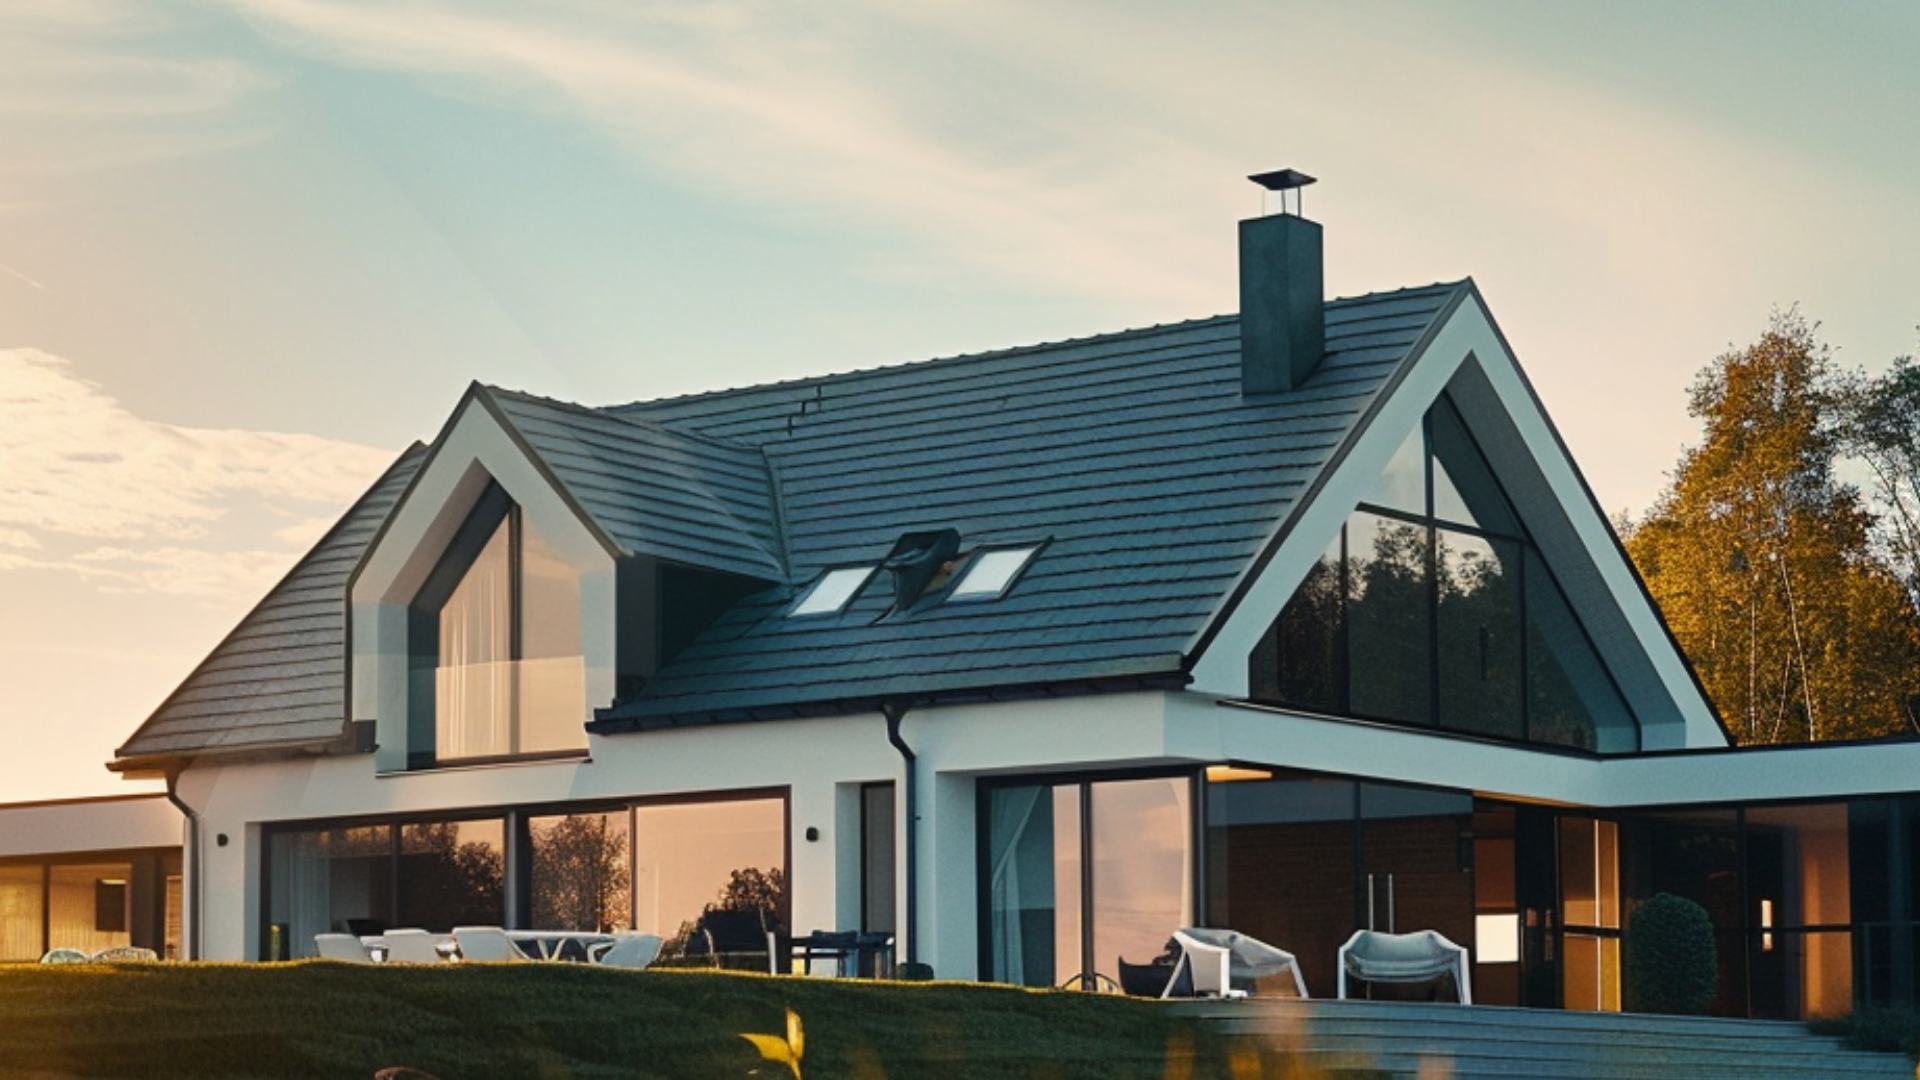 Create an image of a sleek residential image featuring seamlessly integrated slate roofs, blending harmoniously with the modern roof structure for an aesthetically pleasing look.